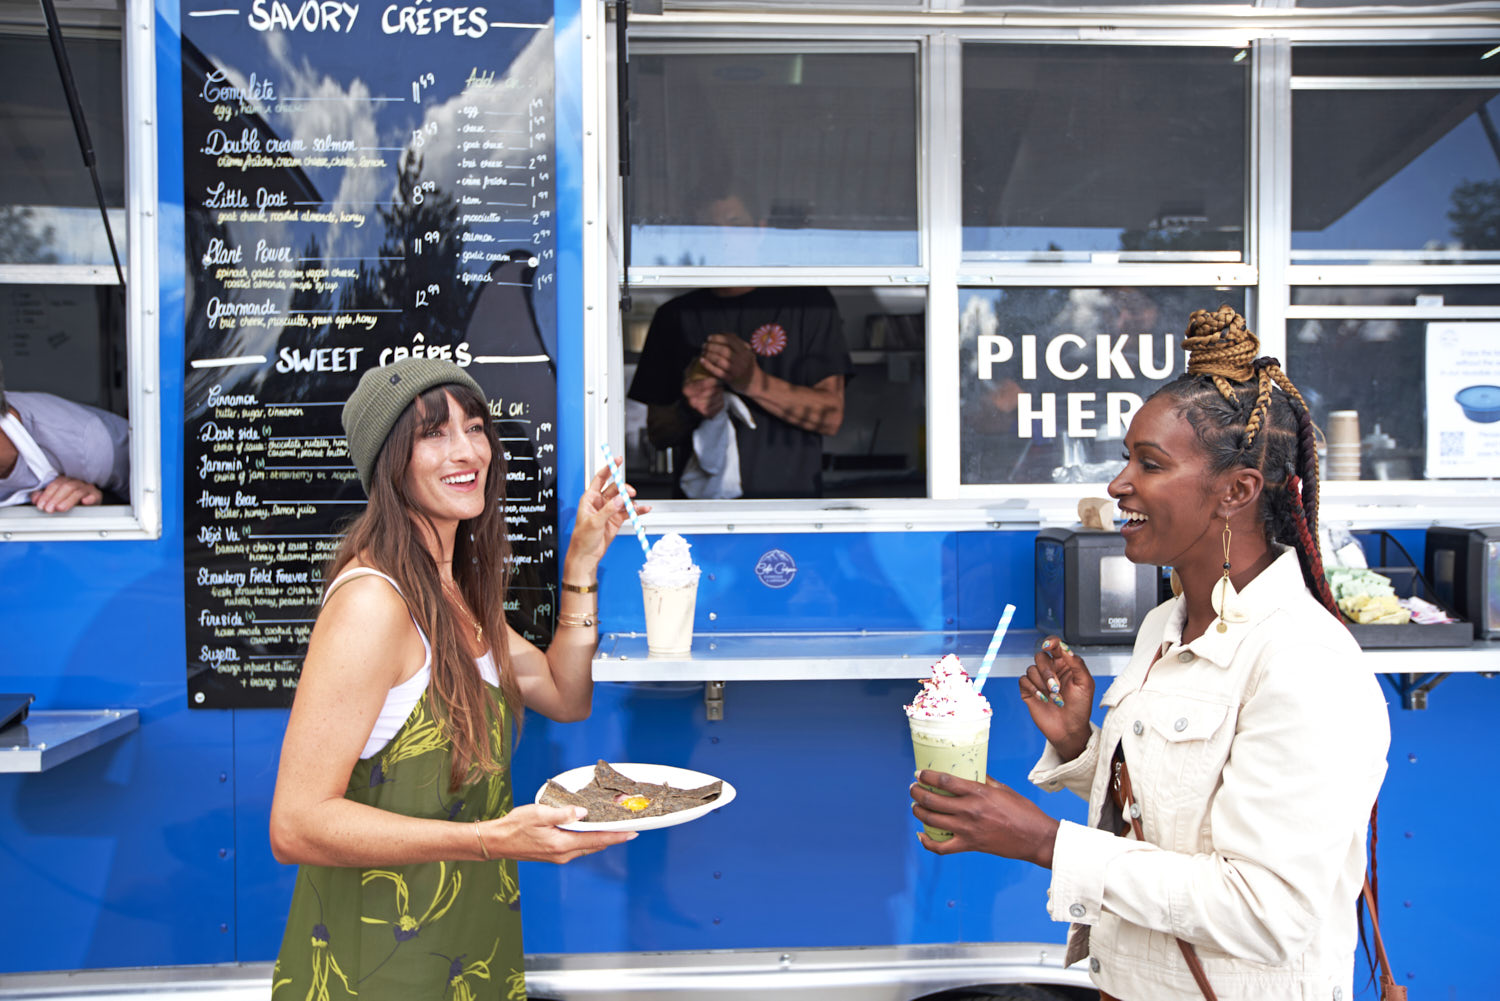 Two women relishing a meal and drinks, standing at the food truck.